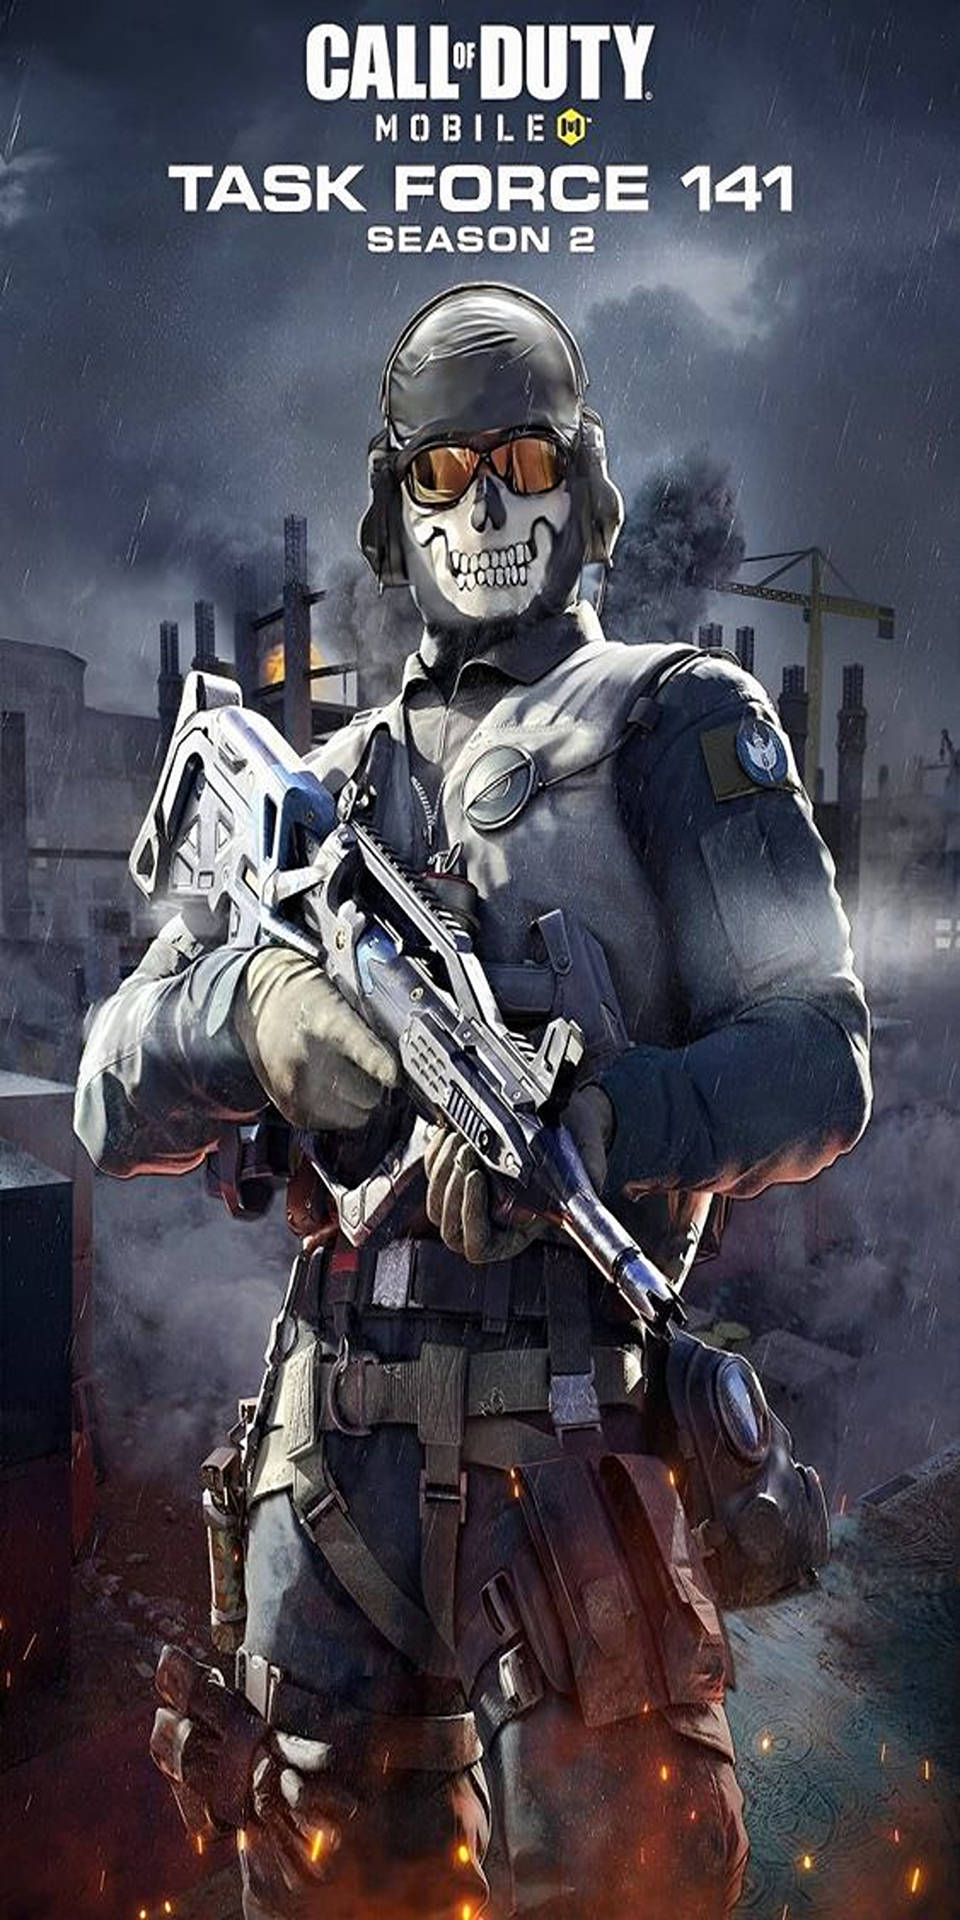 Captivating Call of Duty Soldier Image on Mobile Wallpaper